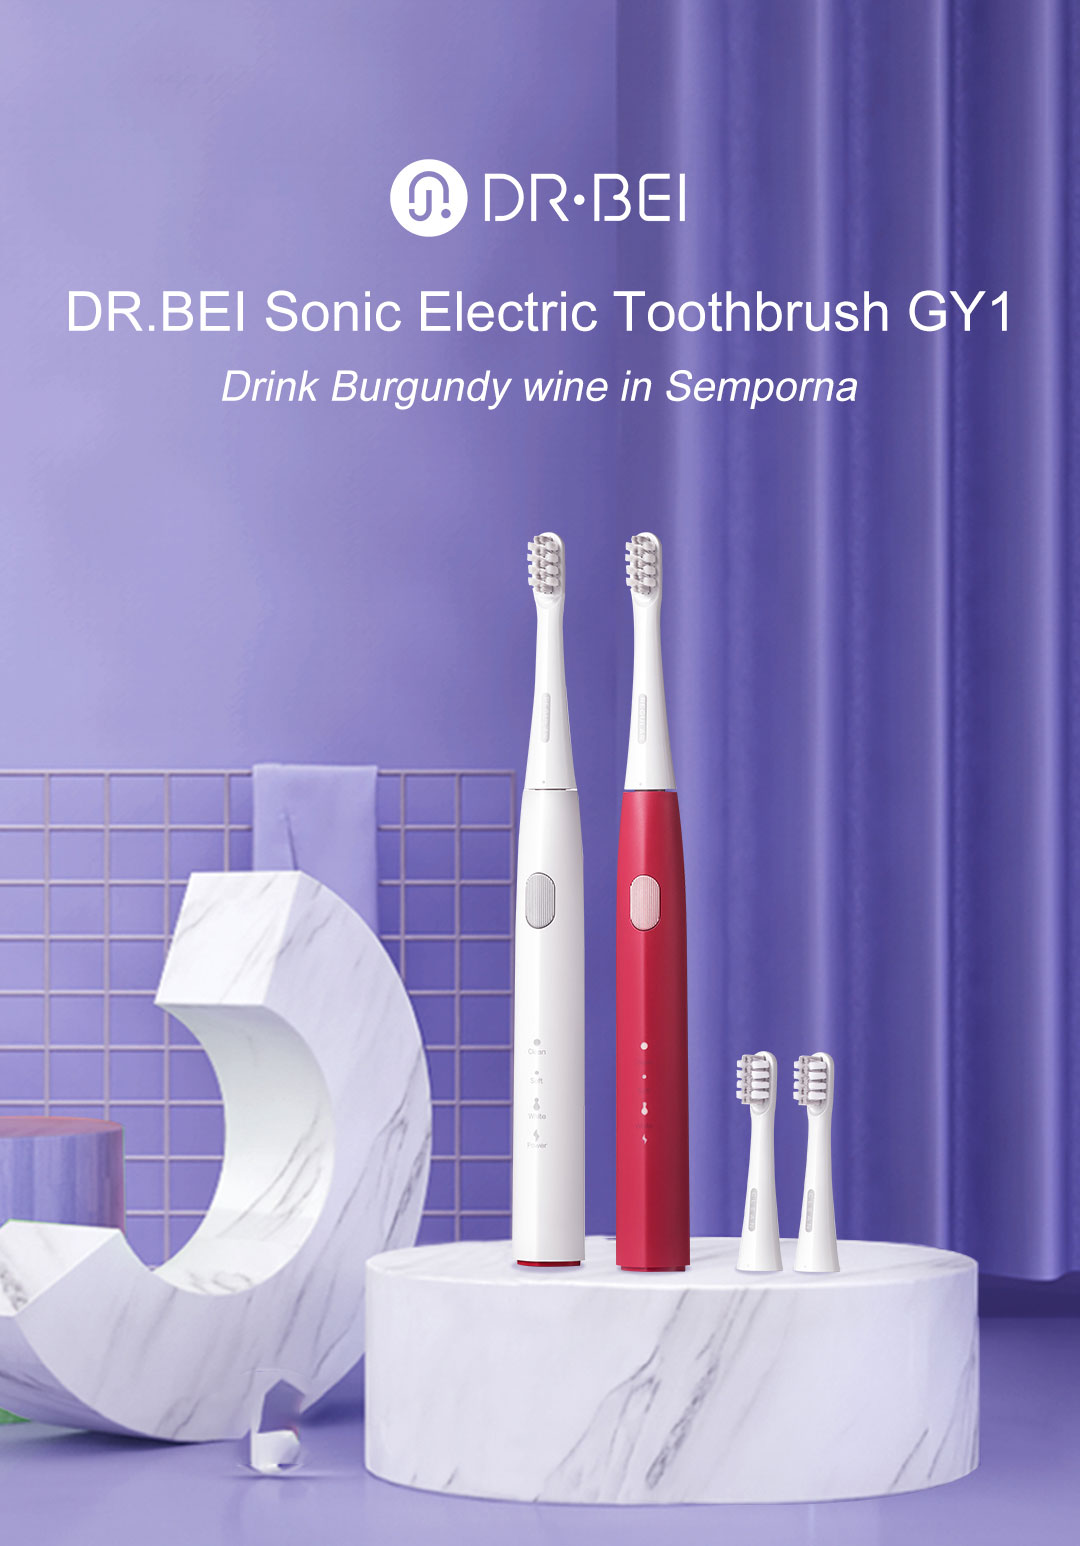 DR.BEI GY1 Toothbrush Heads Xiaomi Youpin DR.BEI GY1 Tooth Brush Head Sensitive Gum Cleaning Whitening Japan America Dupont Toray